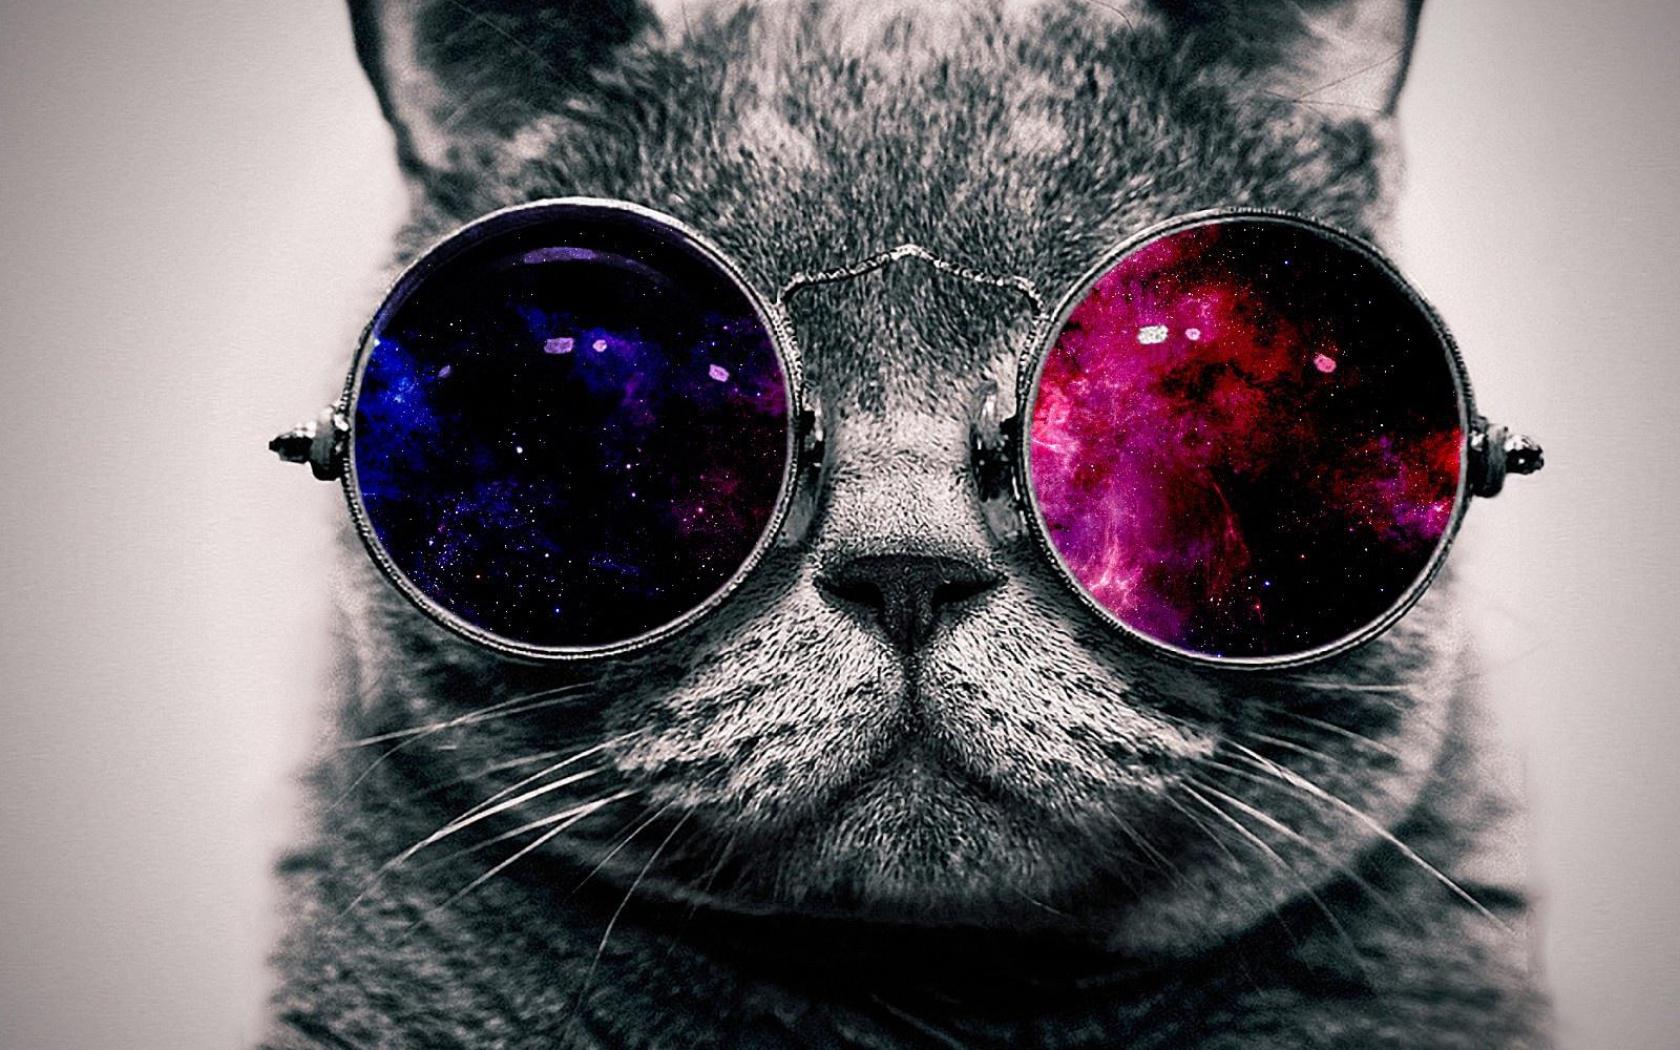 COOL CAT WITH THE GLASSES WALLPAPER   148014   HD Wallpapers